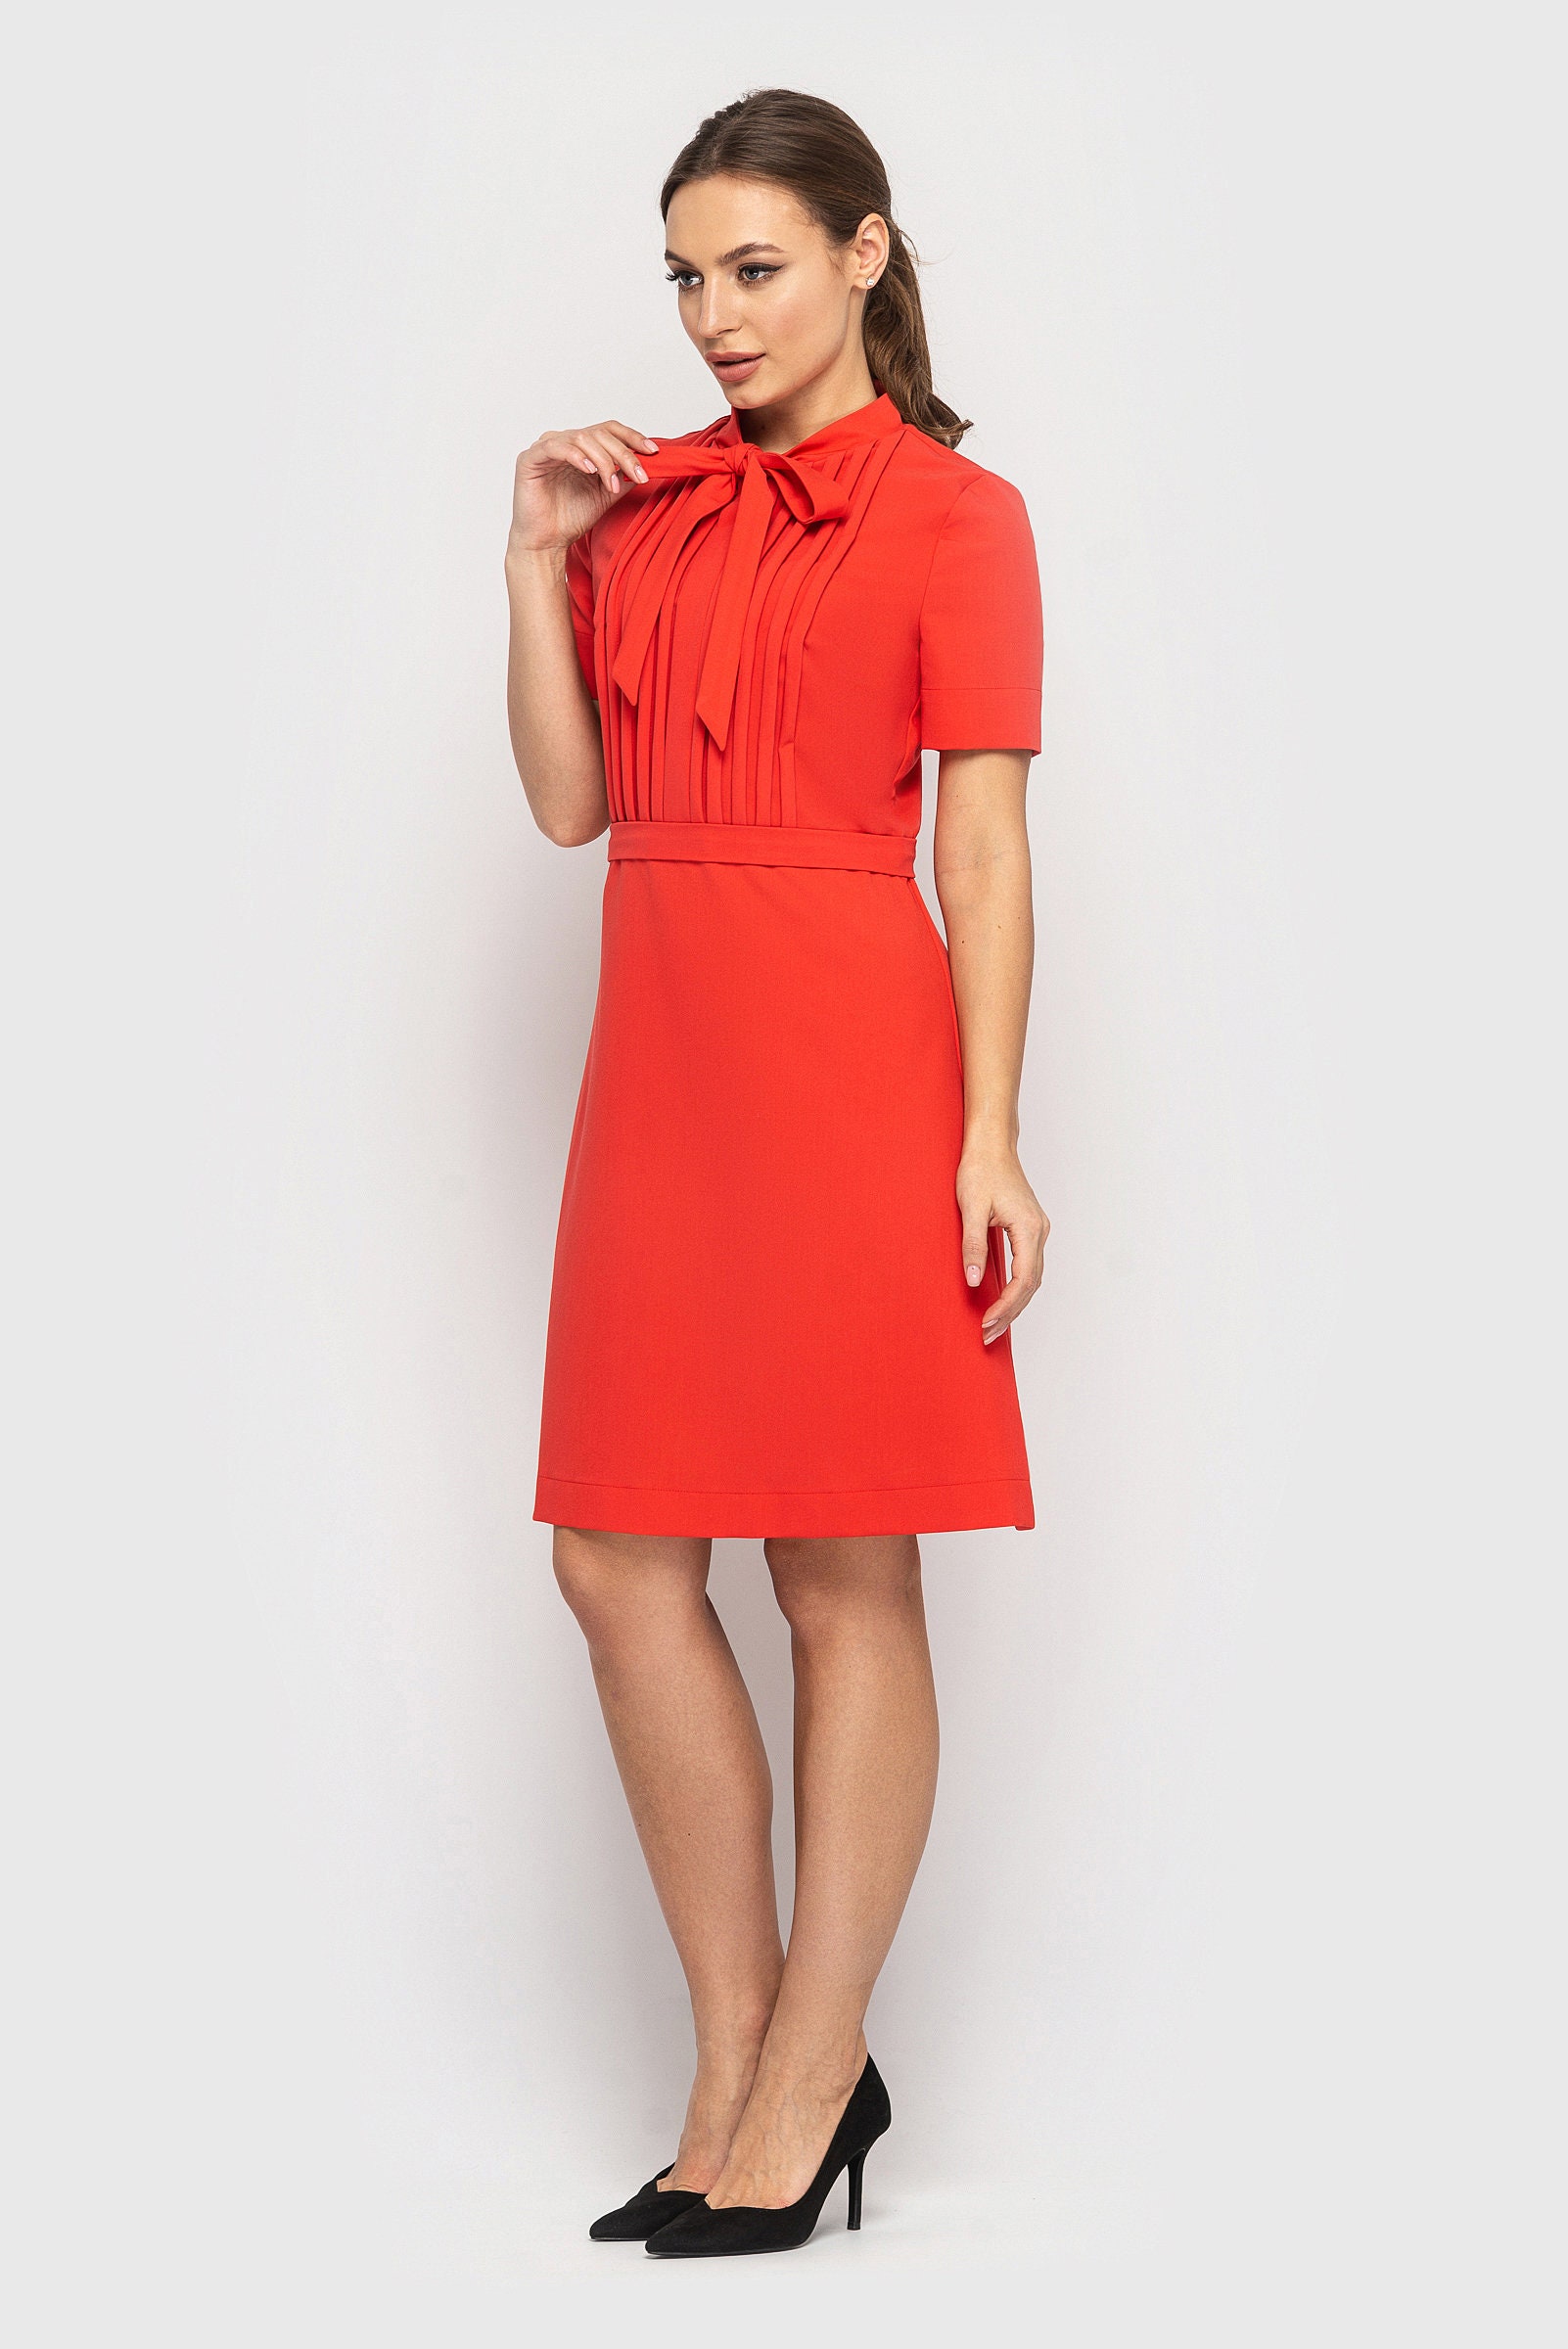 Red Bow Neck Dress With Short Sleeves, Pintucked Dress Mini, Fit